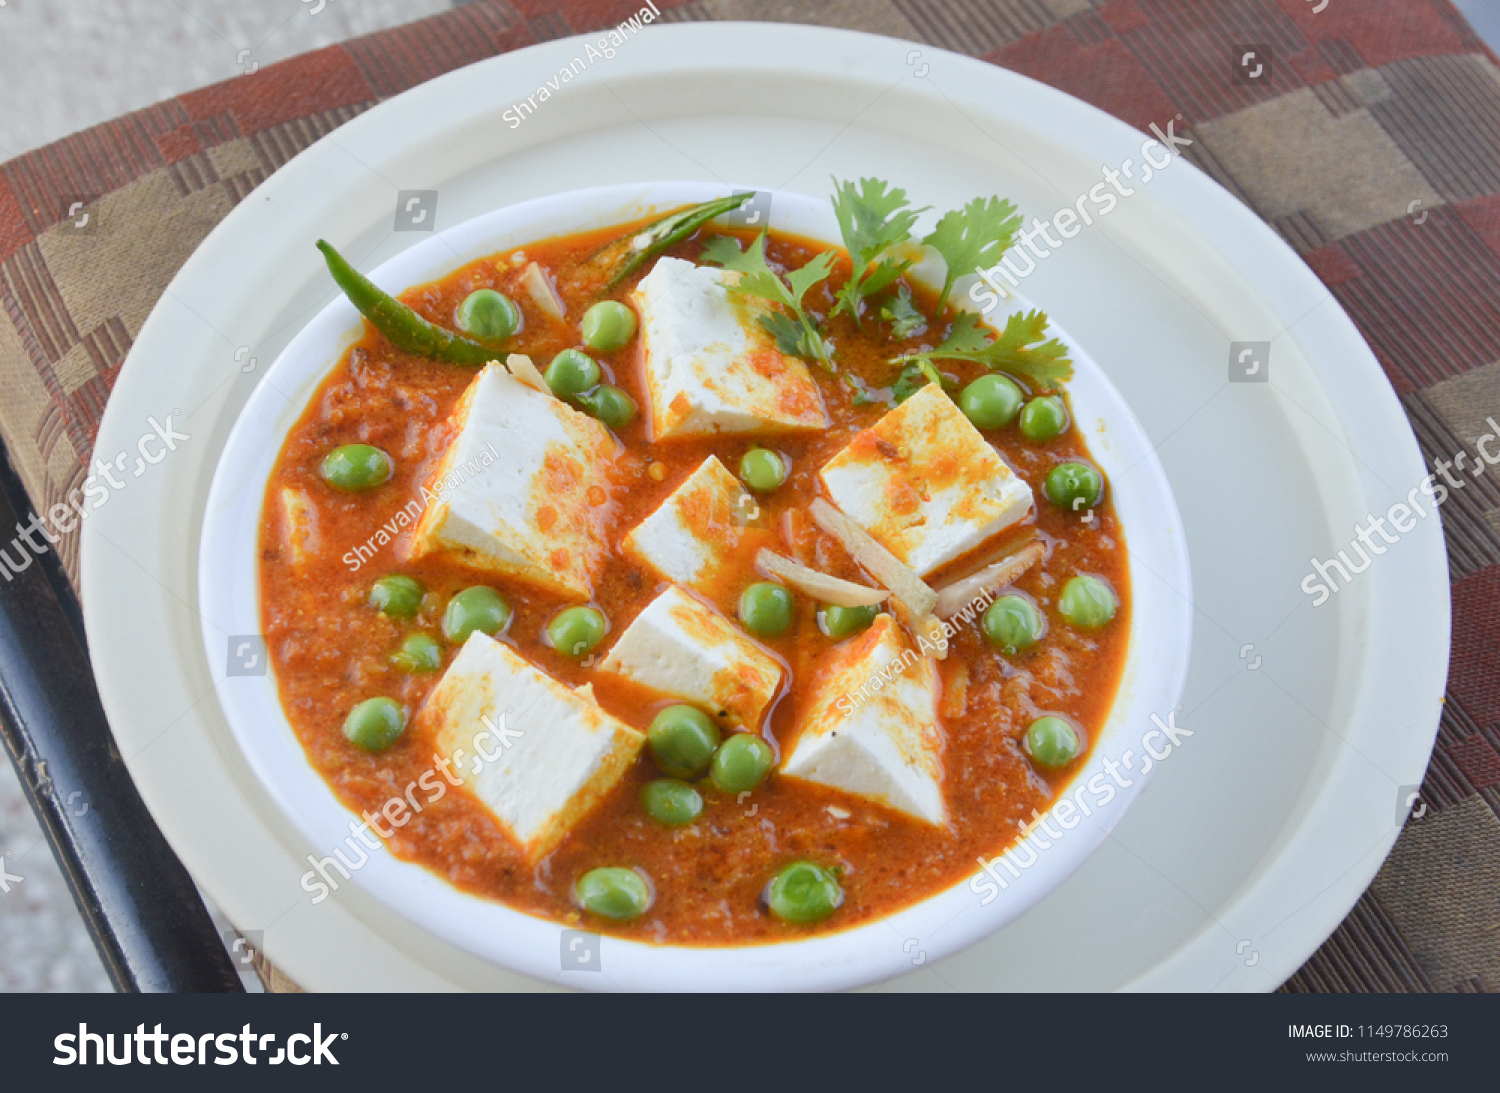 cheese, vegetable dish,cheese and peas #1149786263